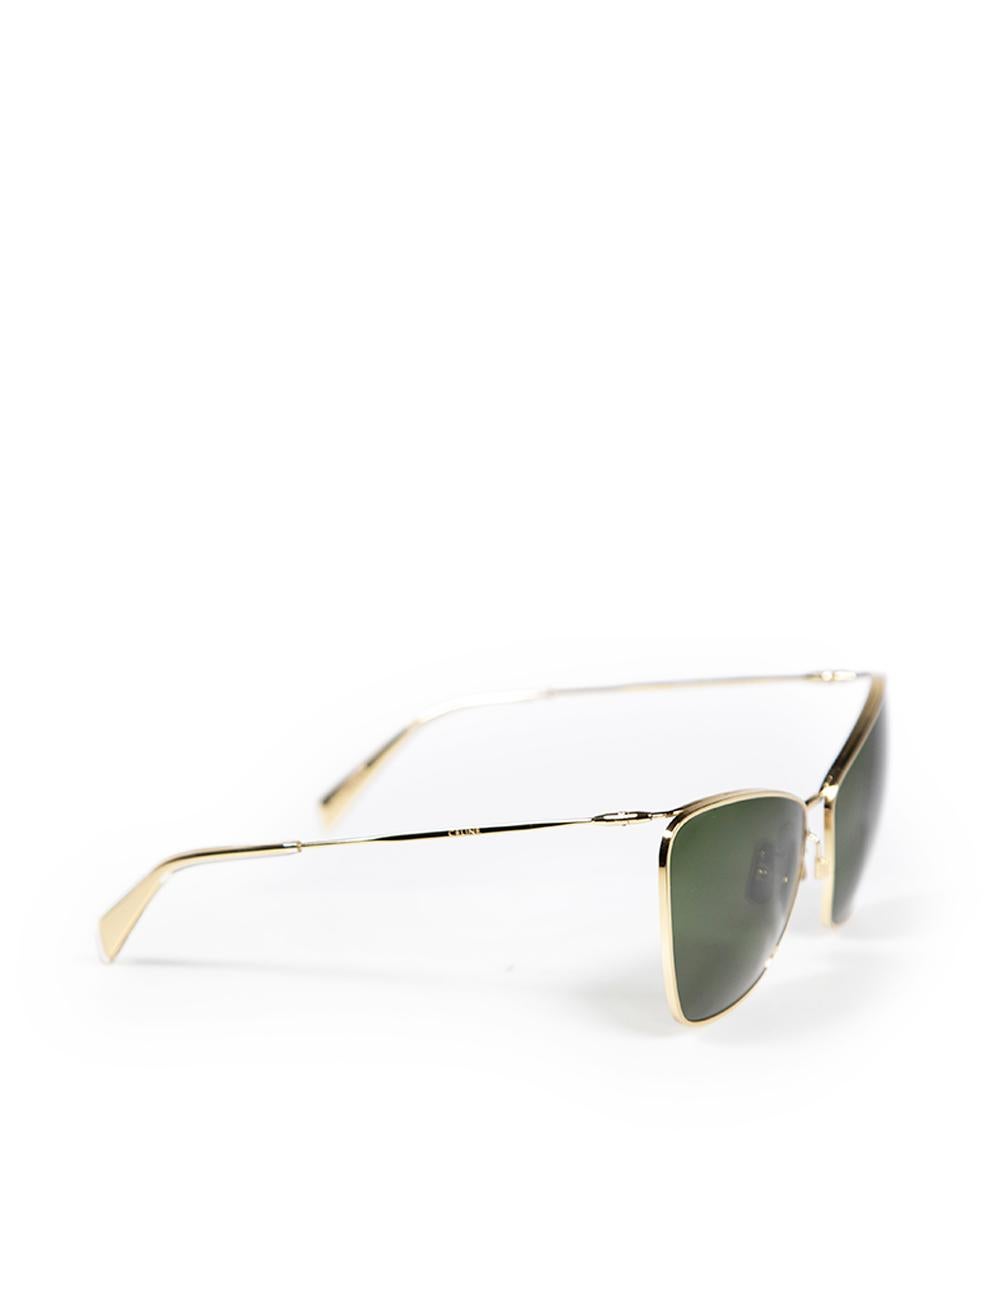 CONDITION is Very good. Hardly any visible wear to sunglasses is evident on this used Céline designer resale item. These sunglasses come with original case.
 
Details
CL40069U model
Gold
Metal
Cat eye sunglasses
Green tinted lenses
Logo on arms
